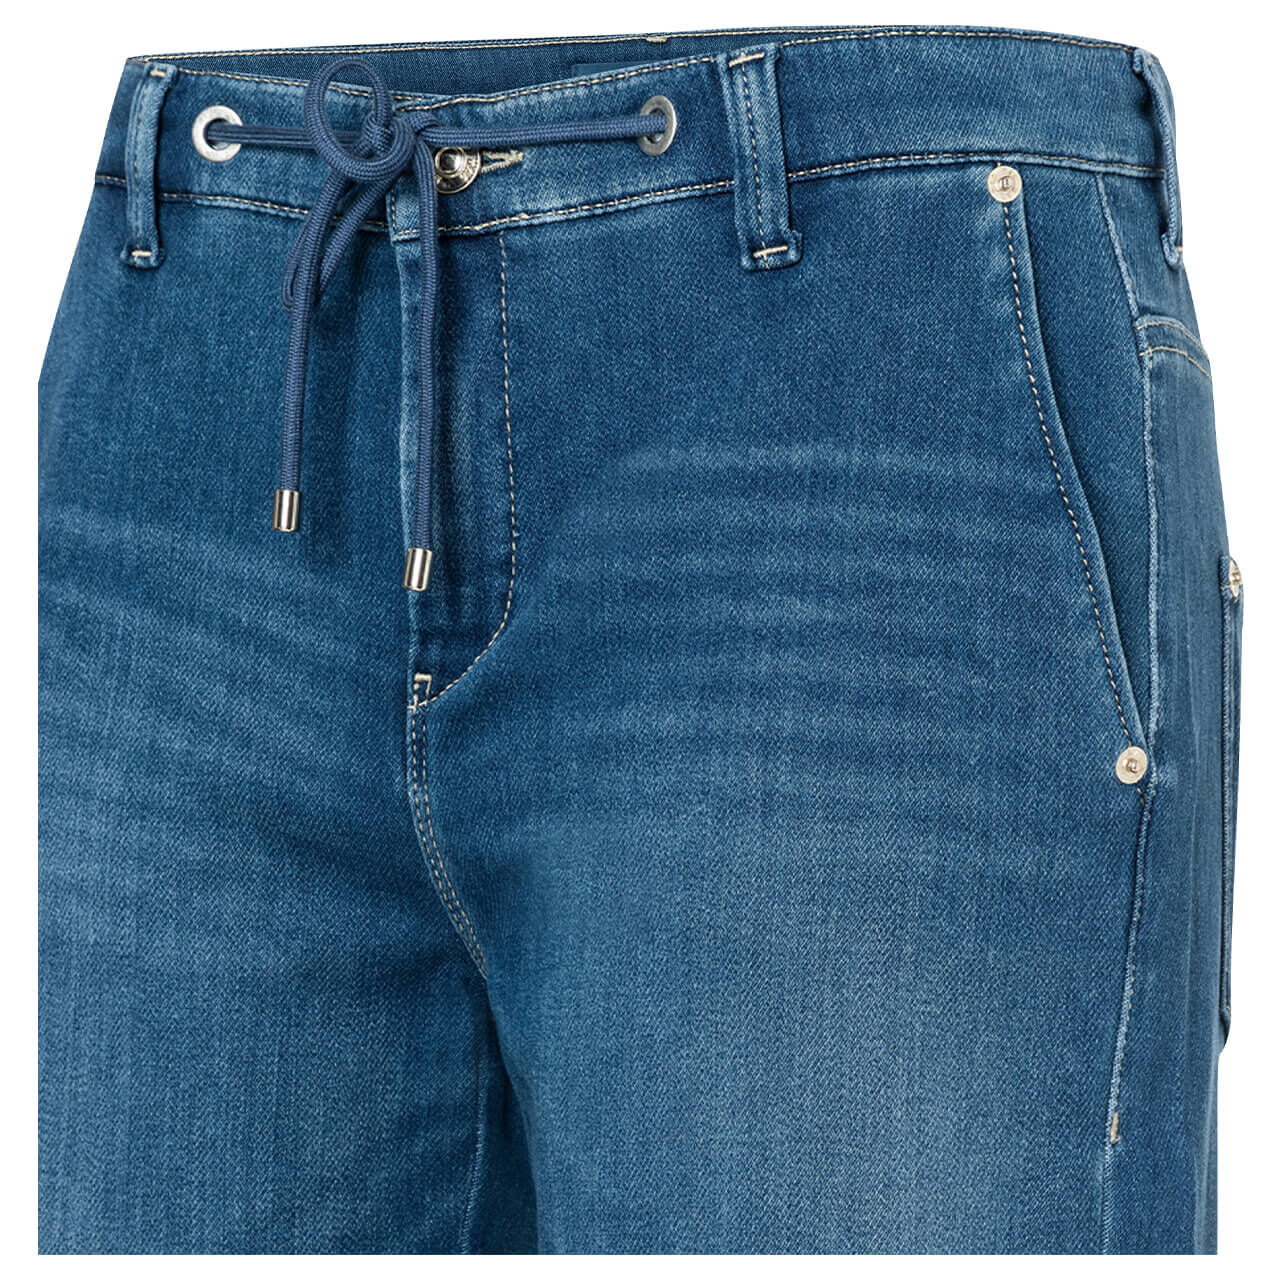 MAC Jogn Short Jeans Shorts mid blue cool washed